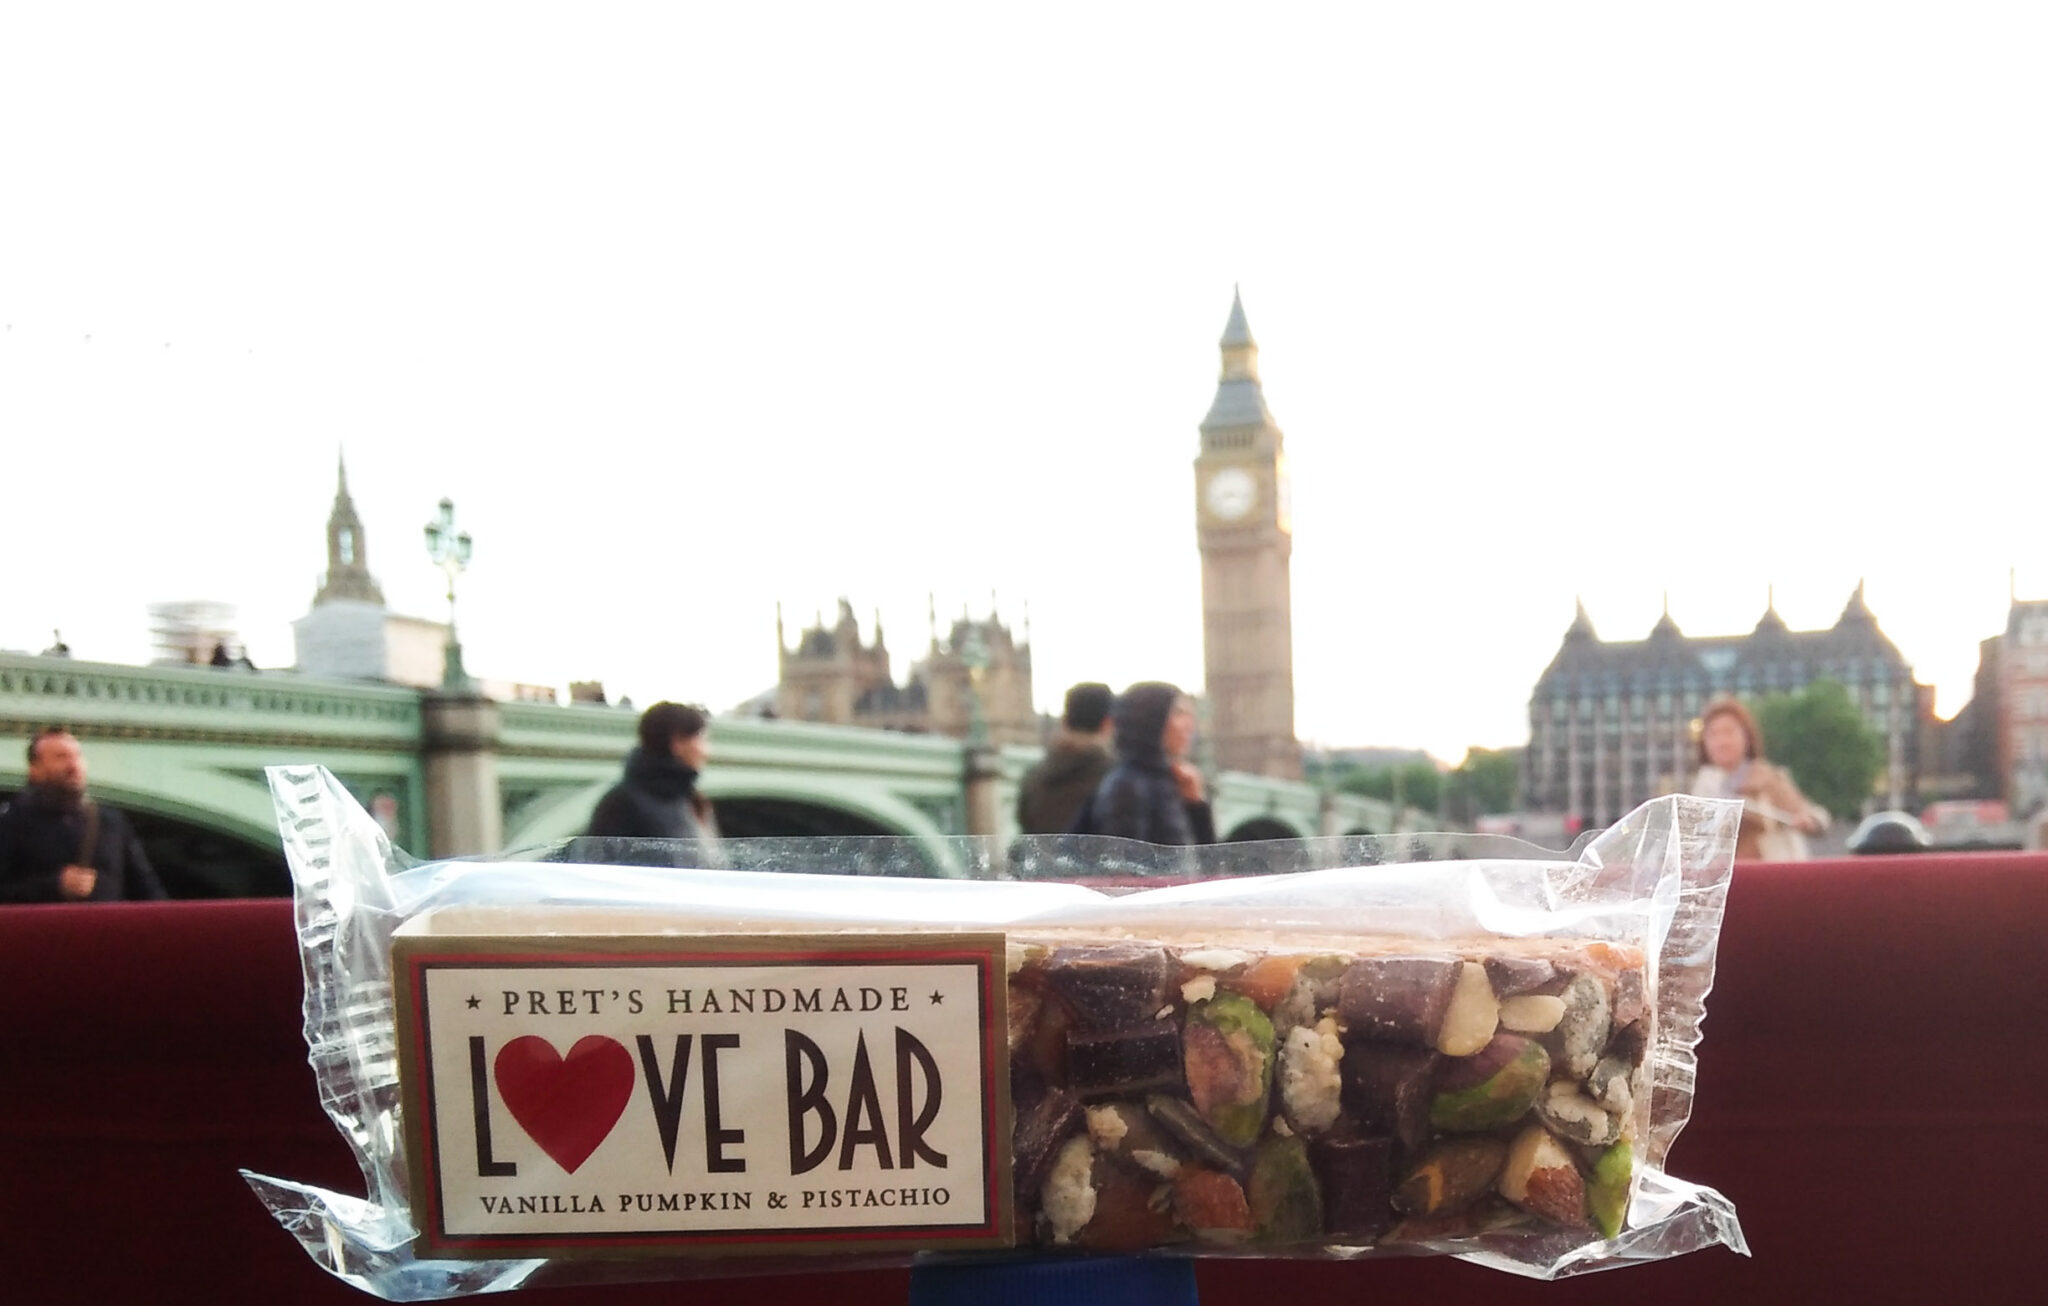 Sitting in a restaurant with a tasty treat called Love Bar while savoring the view of the London Bridge and the Big Ben at a distance.